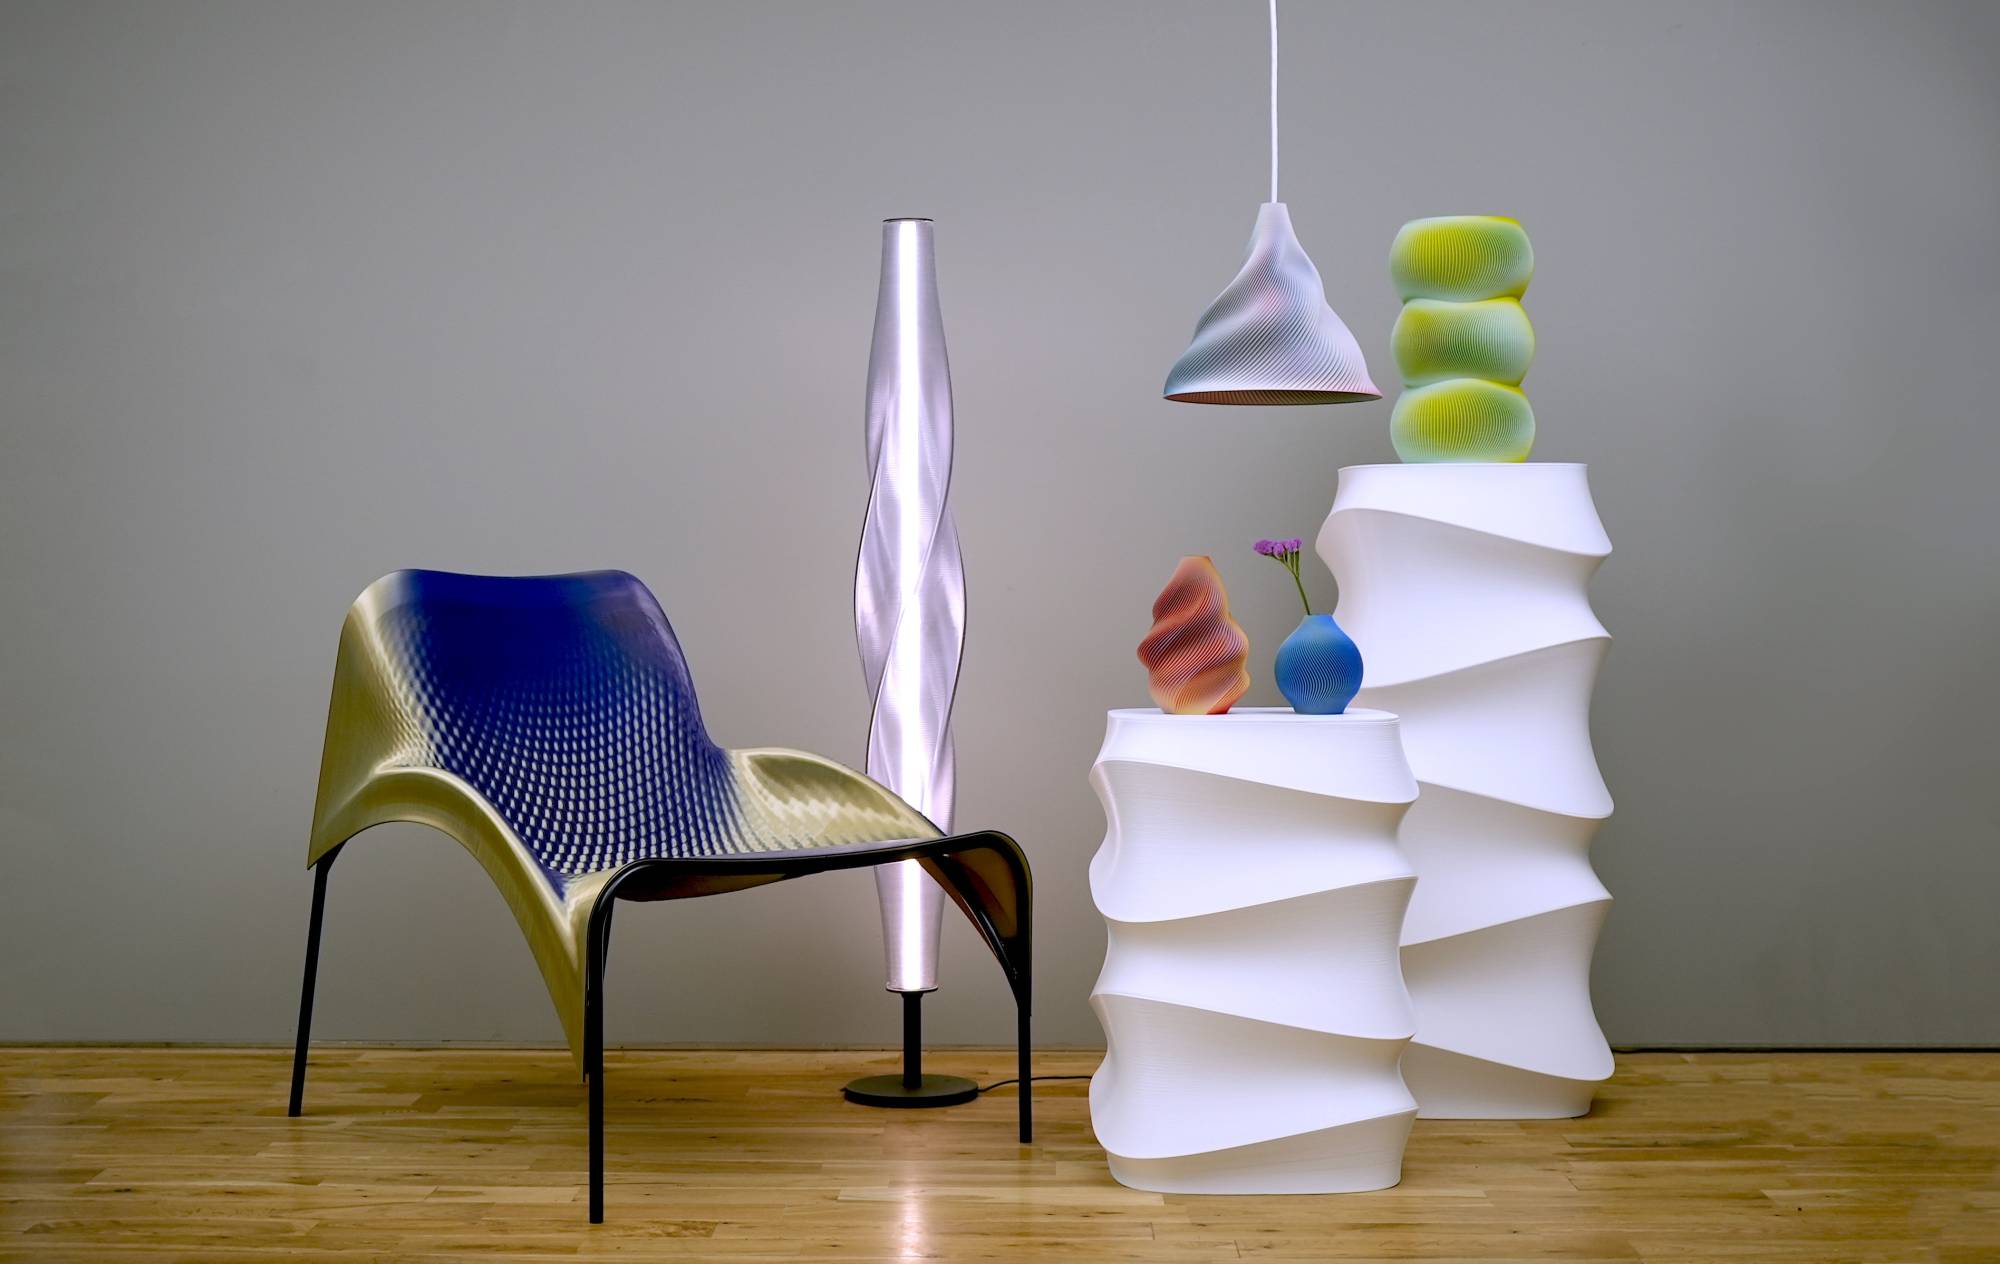 3D-printing design firm Sekisai’s “Phantasmagorical Skin” vases, lampshades and chair, displayed at “Co-Breathing” as part of Milan design week’s Salone Satellite, seem to change in color when viewed from different angles. | COURTESY OF SEKISAI